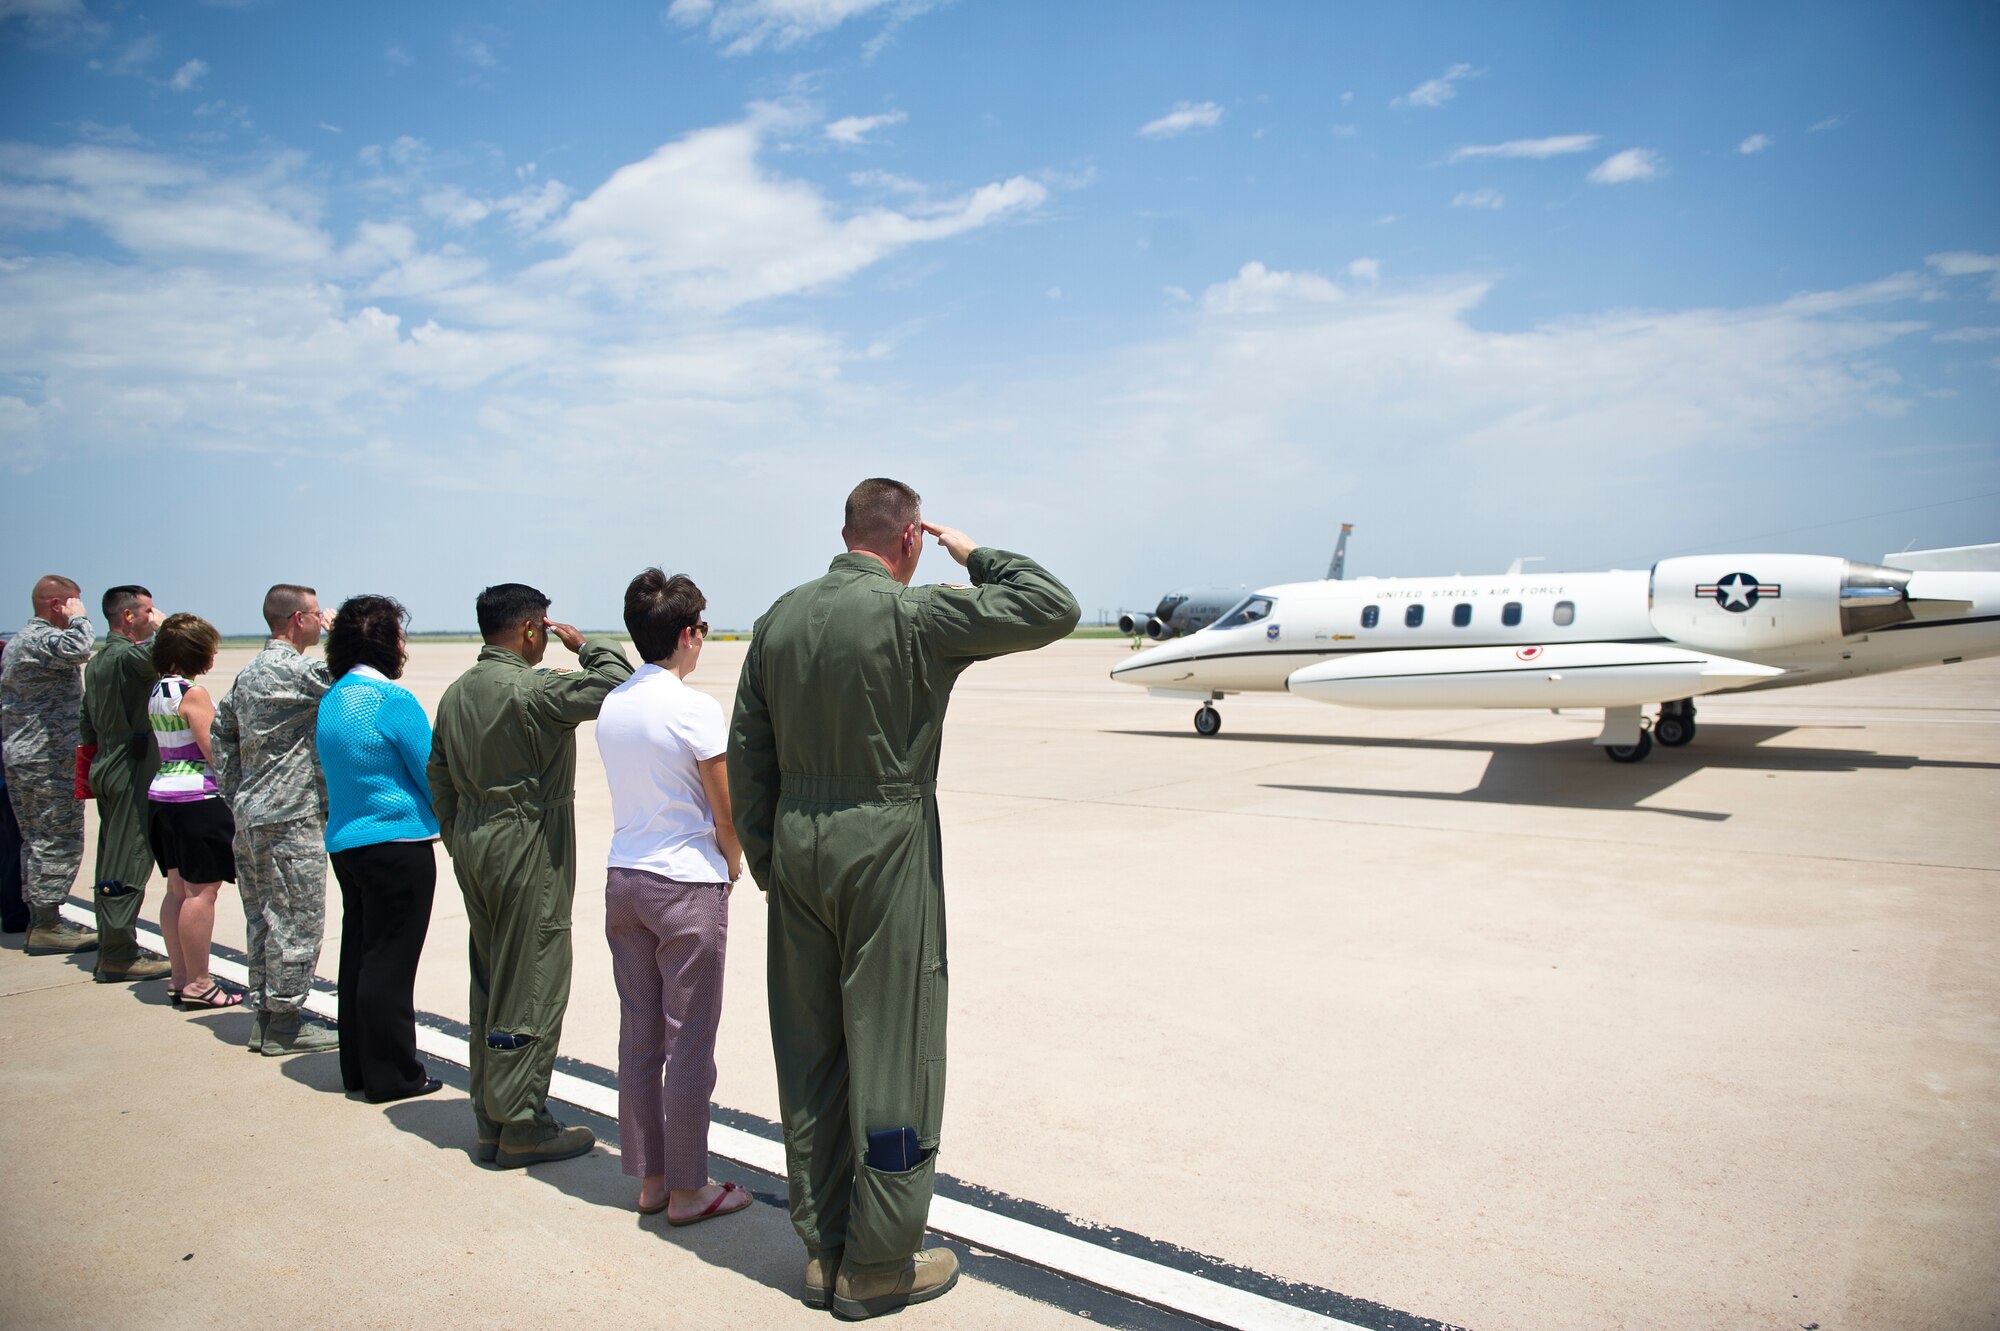 ALTUS AIR FORCE BASE, Okla. – Leaders of the 97th Air Mobility Wing salute the aircraft transporting U.S. Air Force Gen. Robin Rand, commander of Air Education and Training Command, as he arrives on the flightline Aug. 6, 2014. During the visit, Rand, Mrs. Rand and U.S. Air Force Chief Master Sgt. Gerardo Tapia, AETC command chief, were able to see Altus AFB and meet some of the top performing Airmen. (U.S. Air Force photo by Senior Airman Dillon Davis/Released)